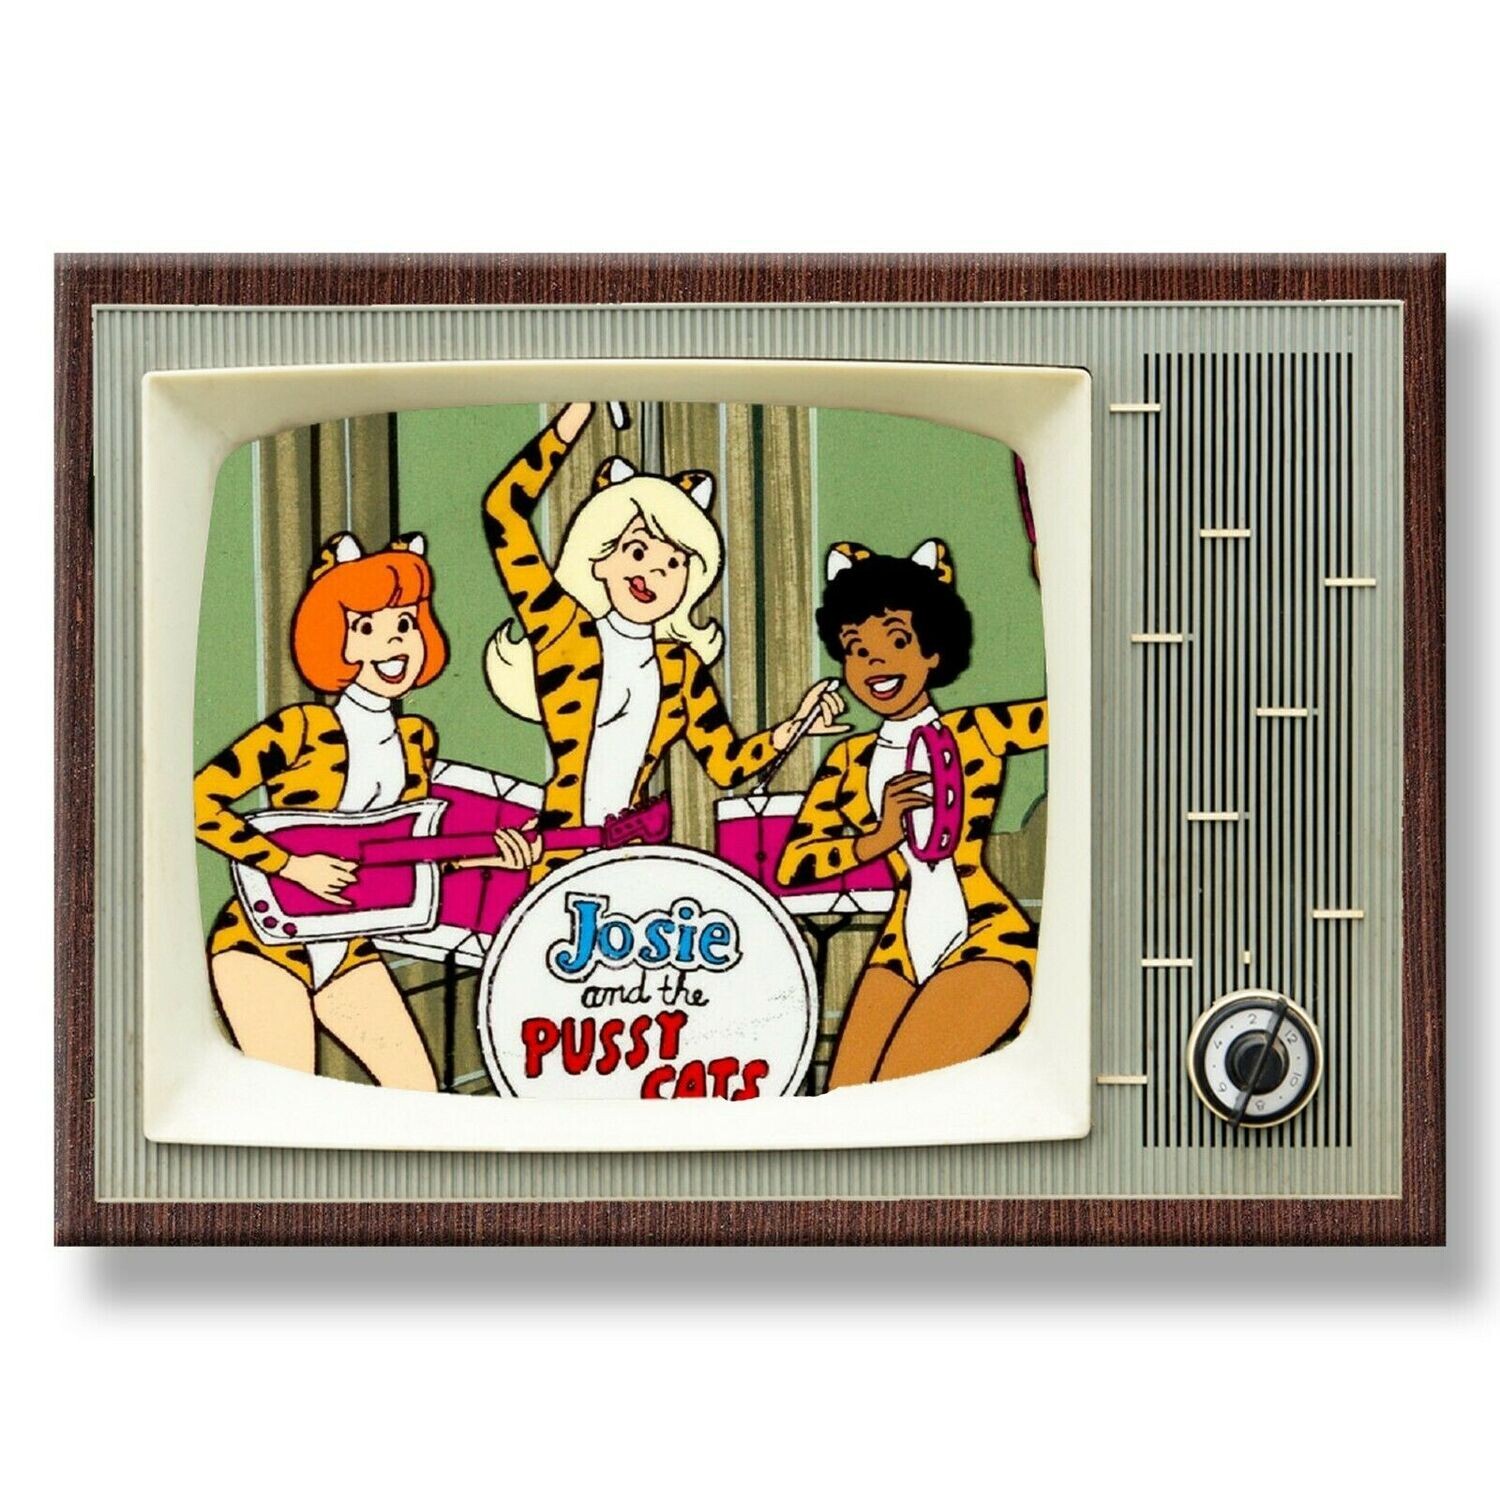 Josie and the Pussycats Large Metal TV Magnet